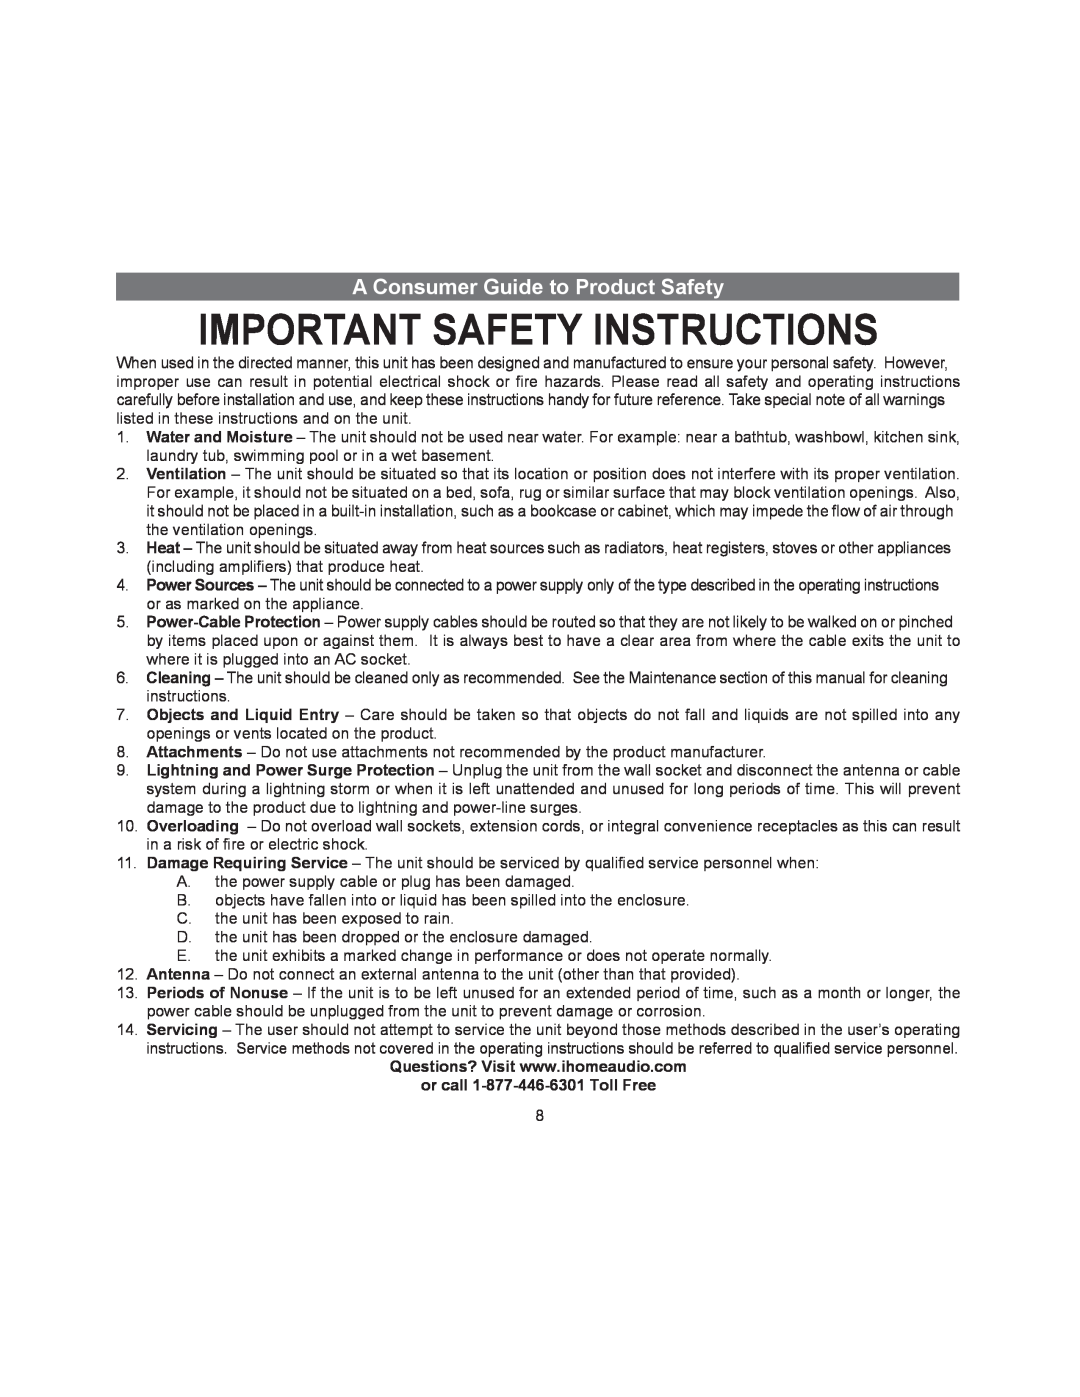 iHome iDL45 manual A Consumer Guide to Product Safety, or call 1-877-446-6301 Toll Free, Important Safety Instructions 